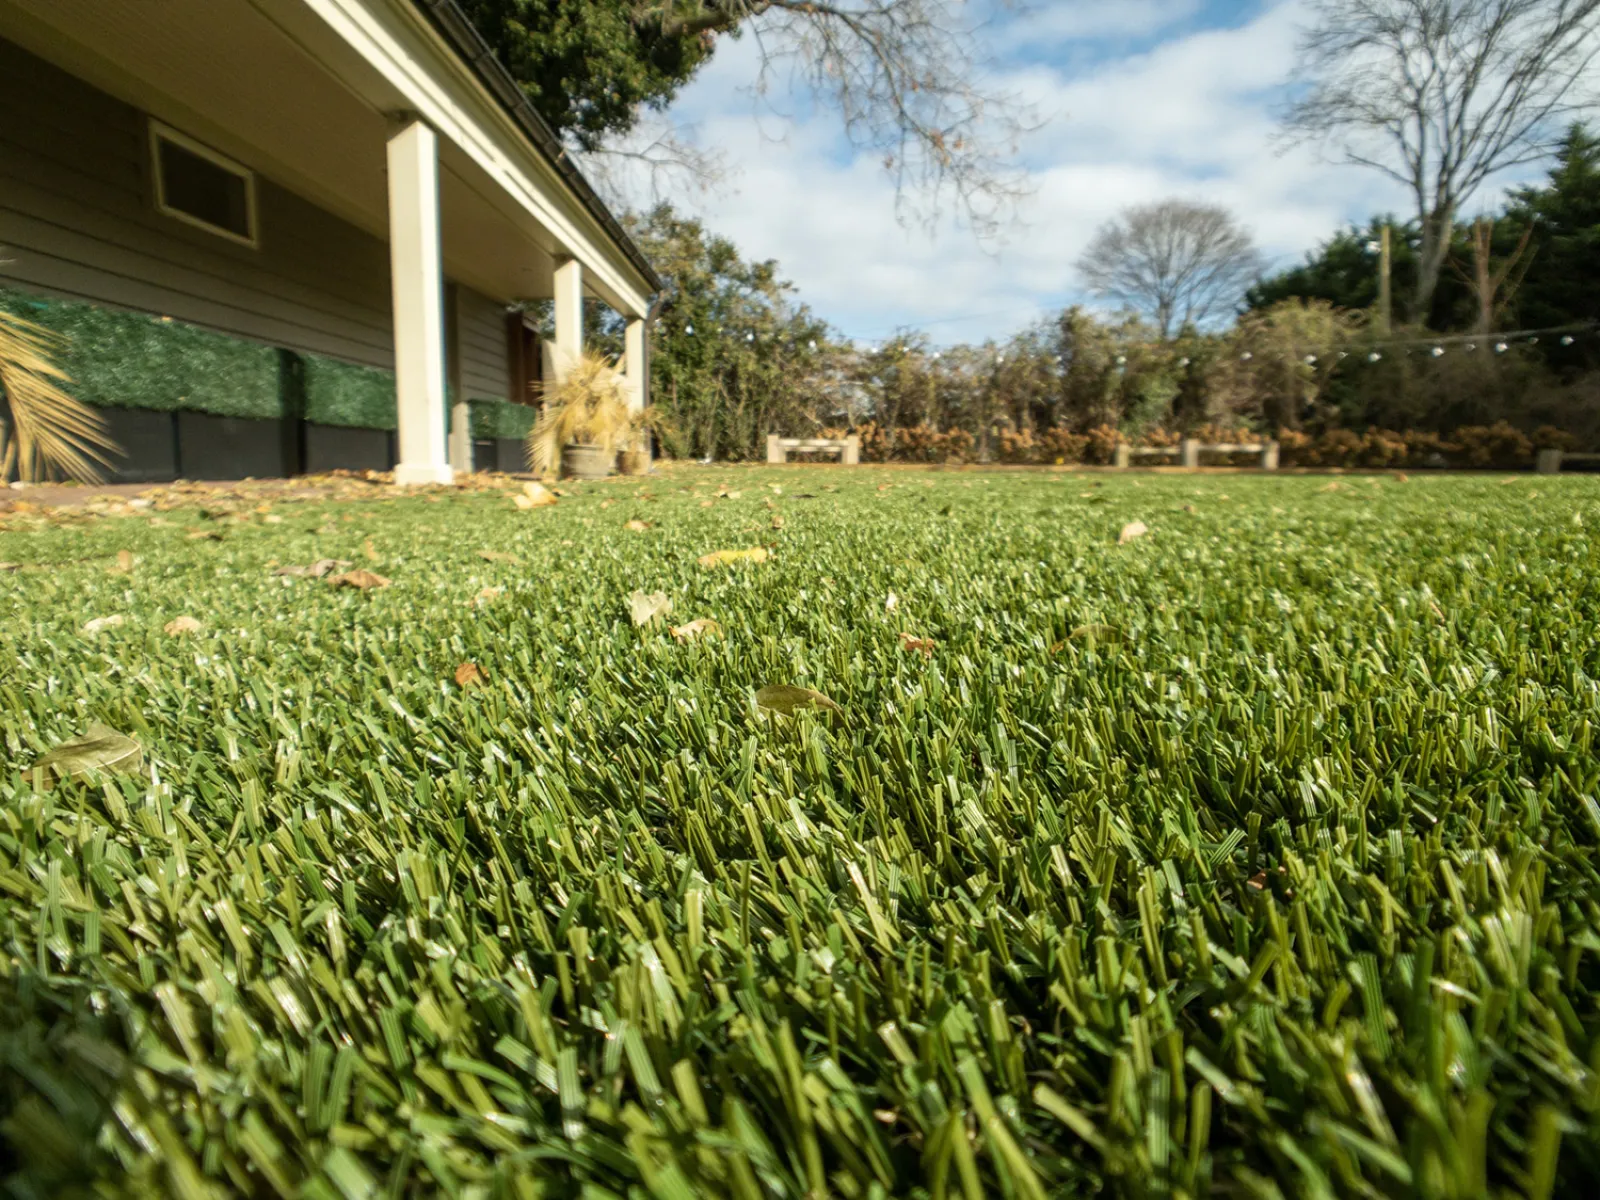 a grassy yard with a house in the background